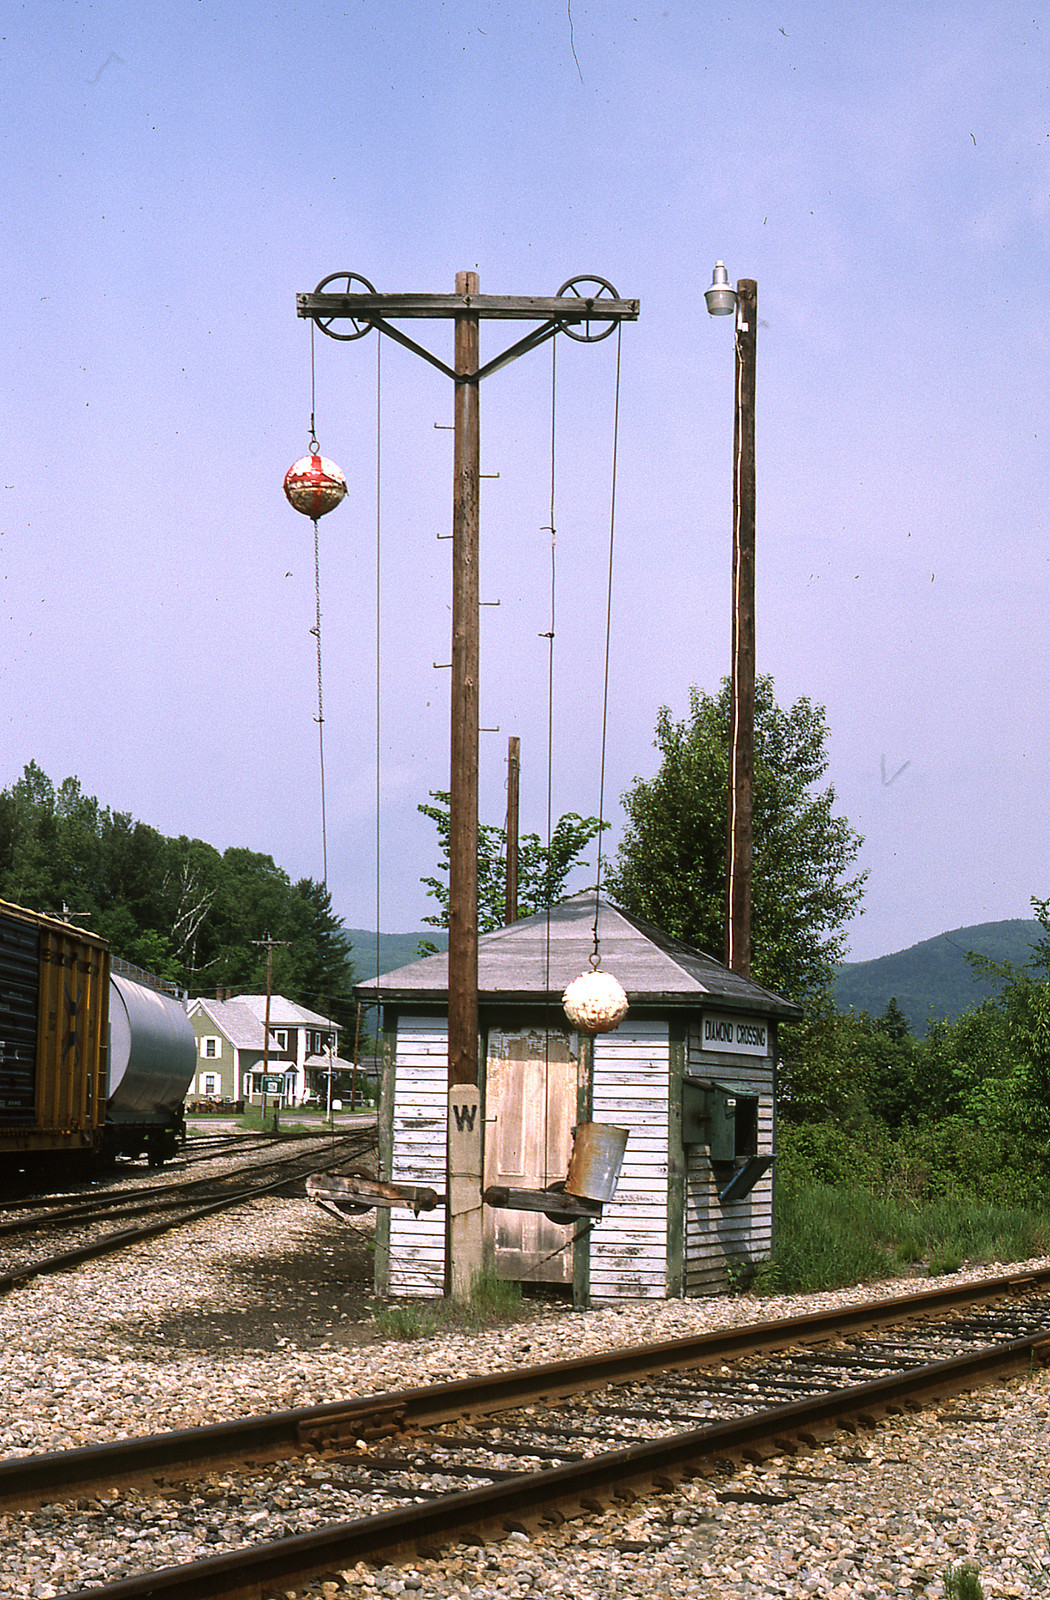 Early Signals Index - Railroad Signals of the US